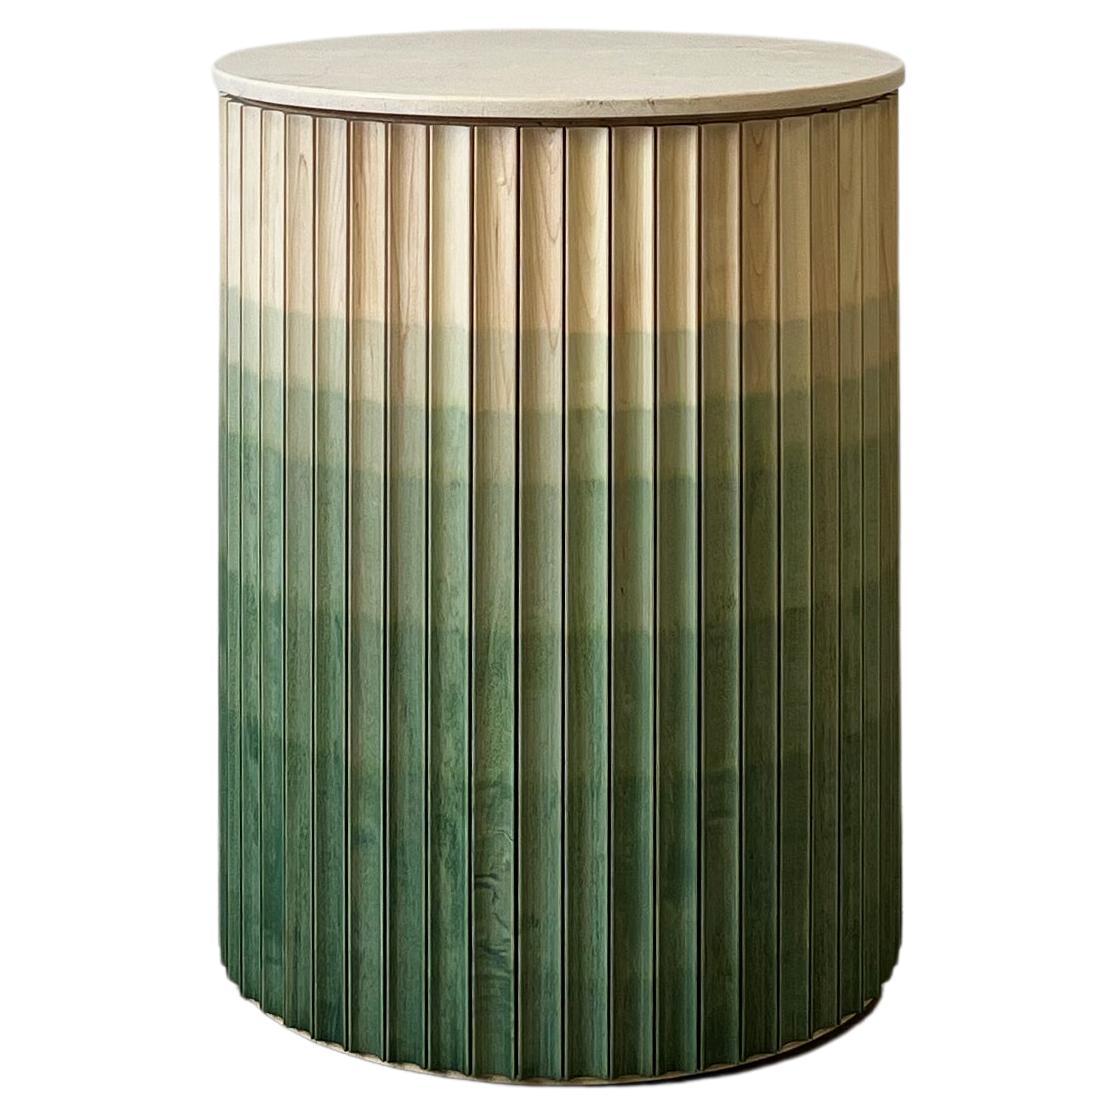 Pilar Round End Table /Celadon Green Ombré Maple Wood /Crema Marble Top by INDO- For Sale